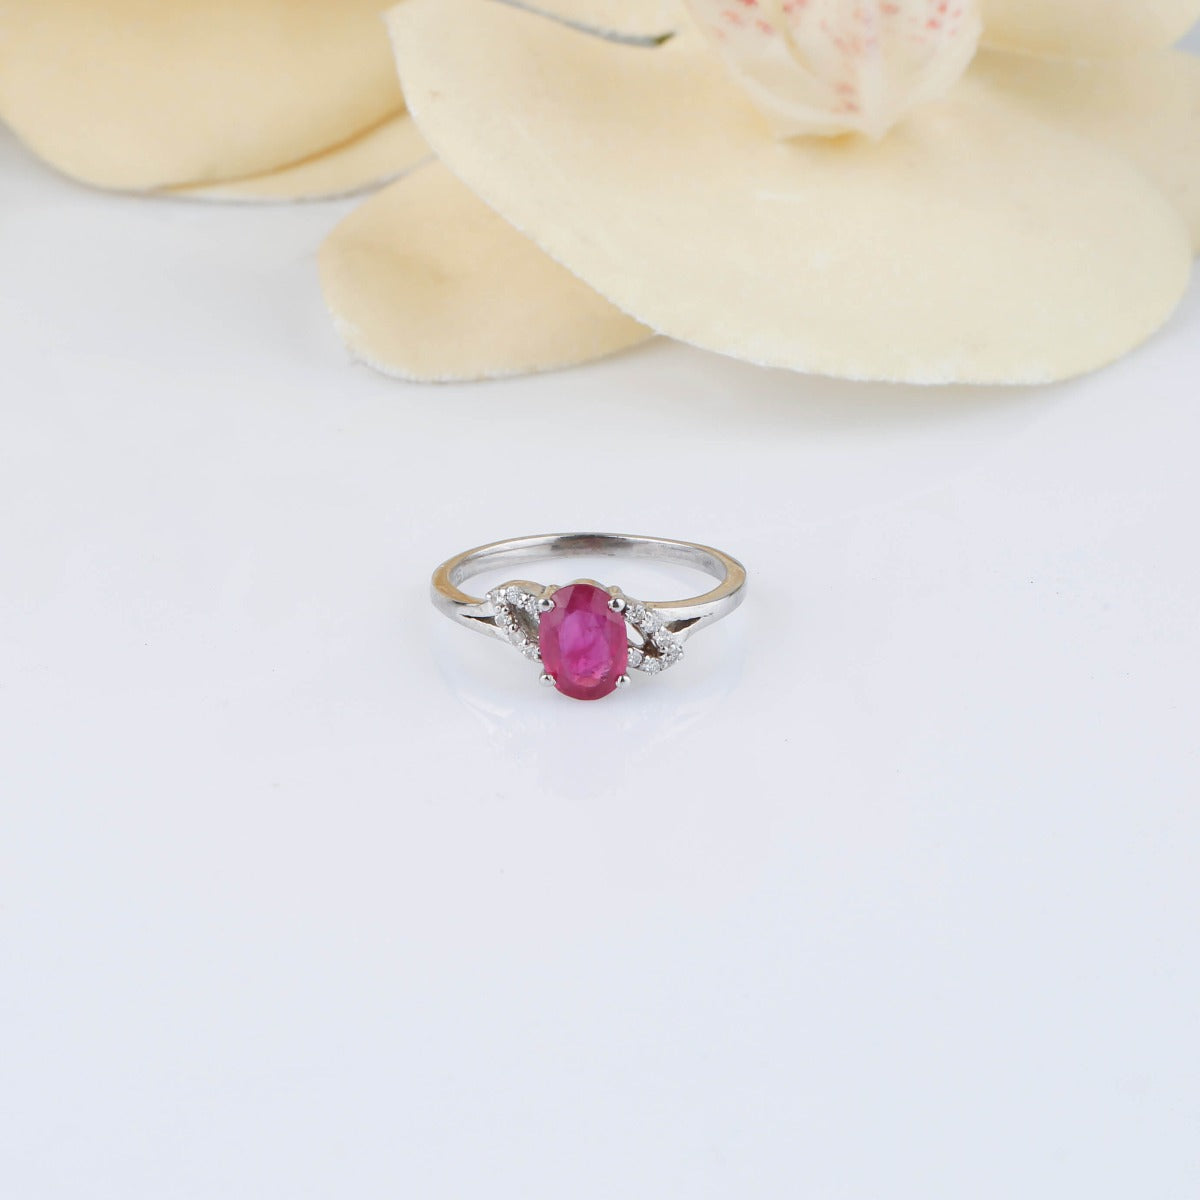 Staggering ruby & diamond ring